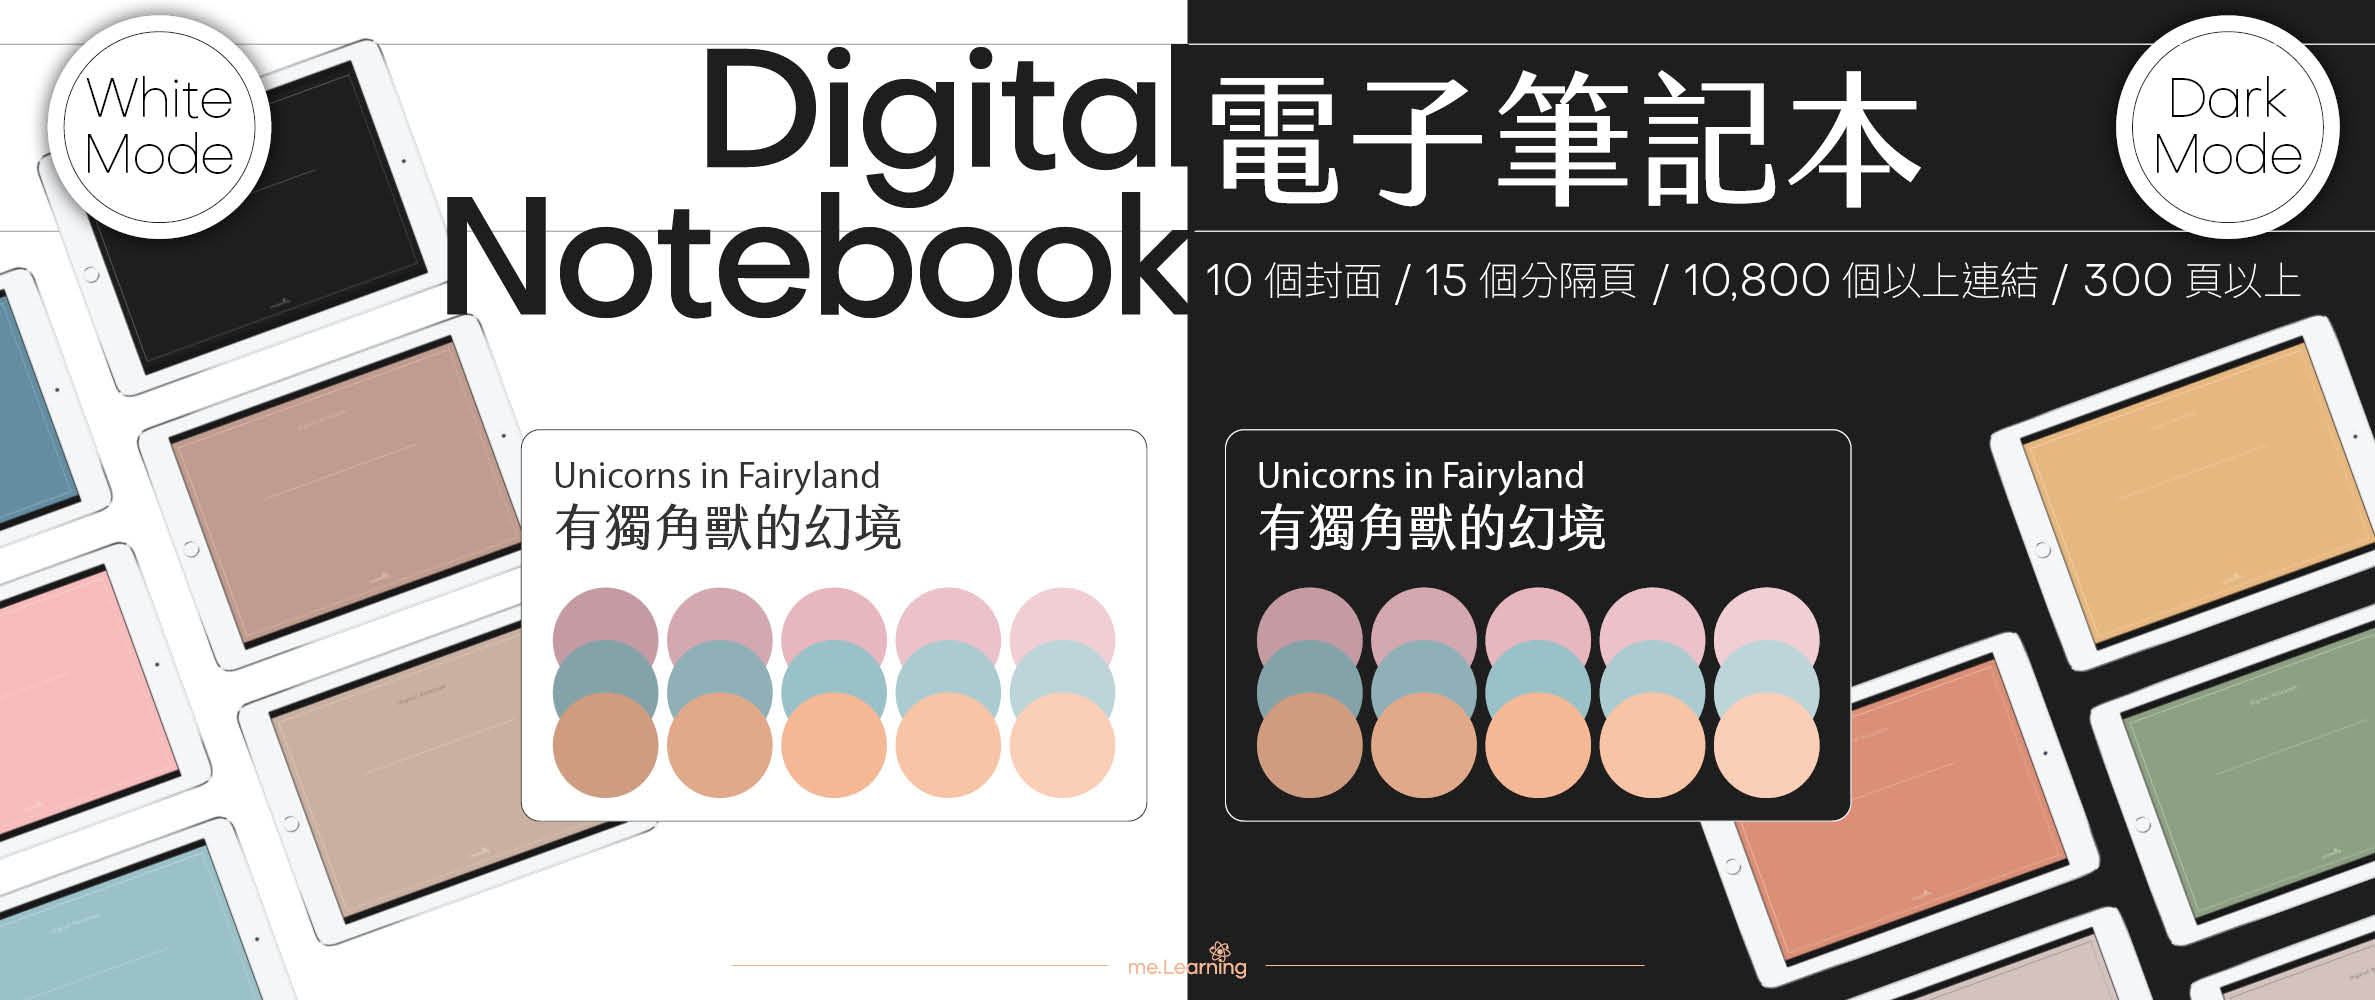 Notebook-Landscape-Solid Color Cover-15 Tabs-Unicorns-in-Fairyland 不想念書時上市 | me.Learning